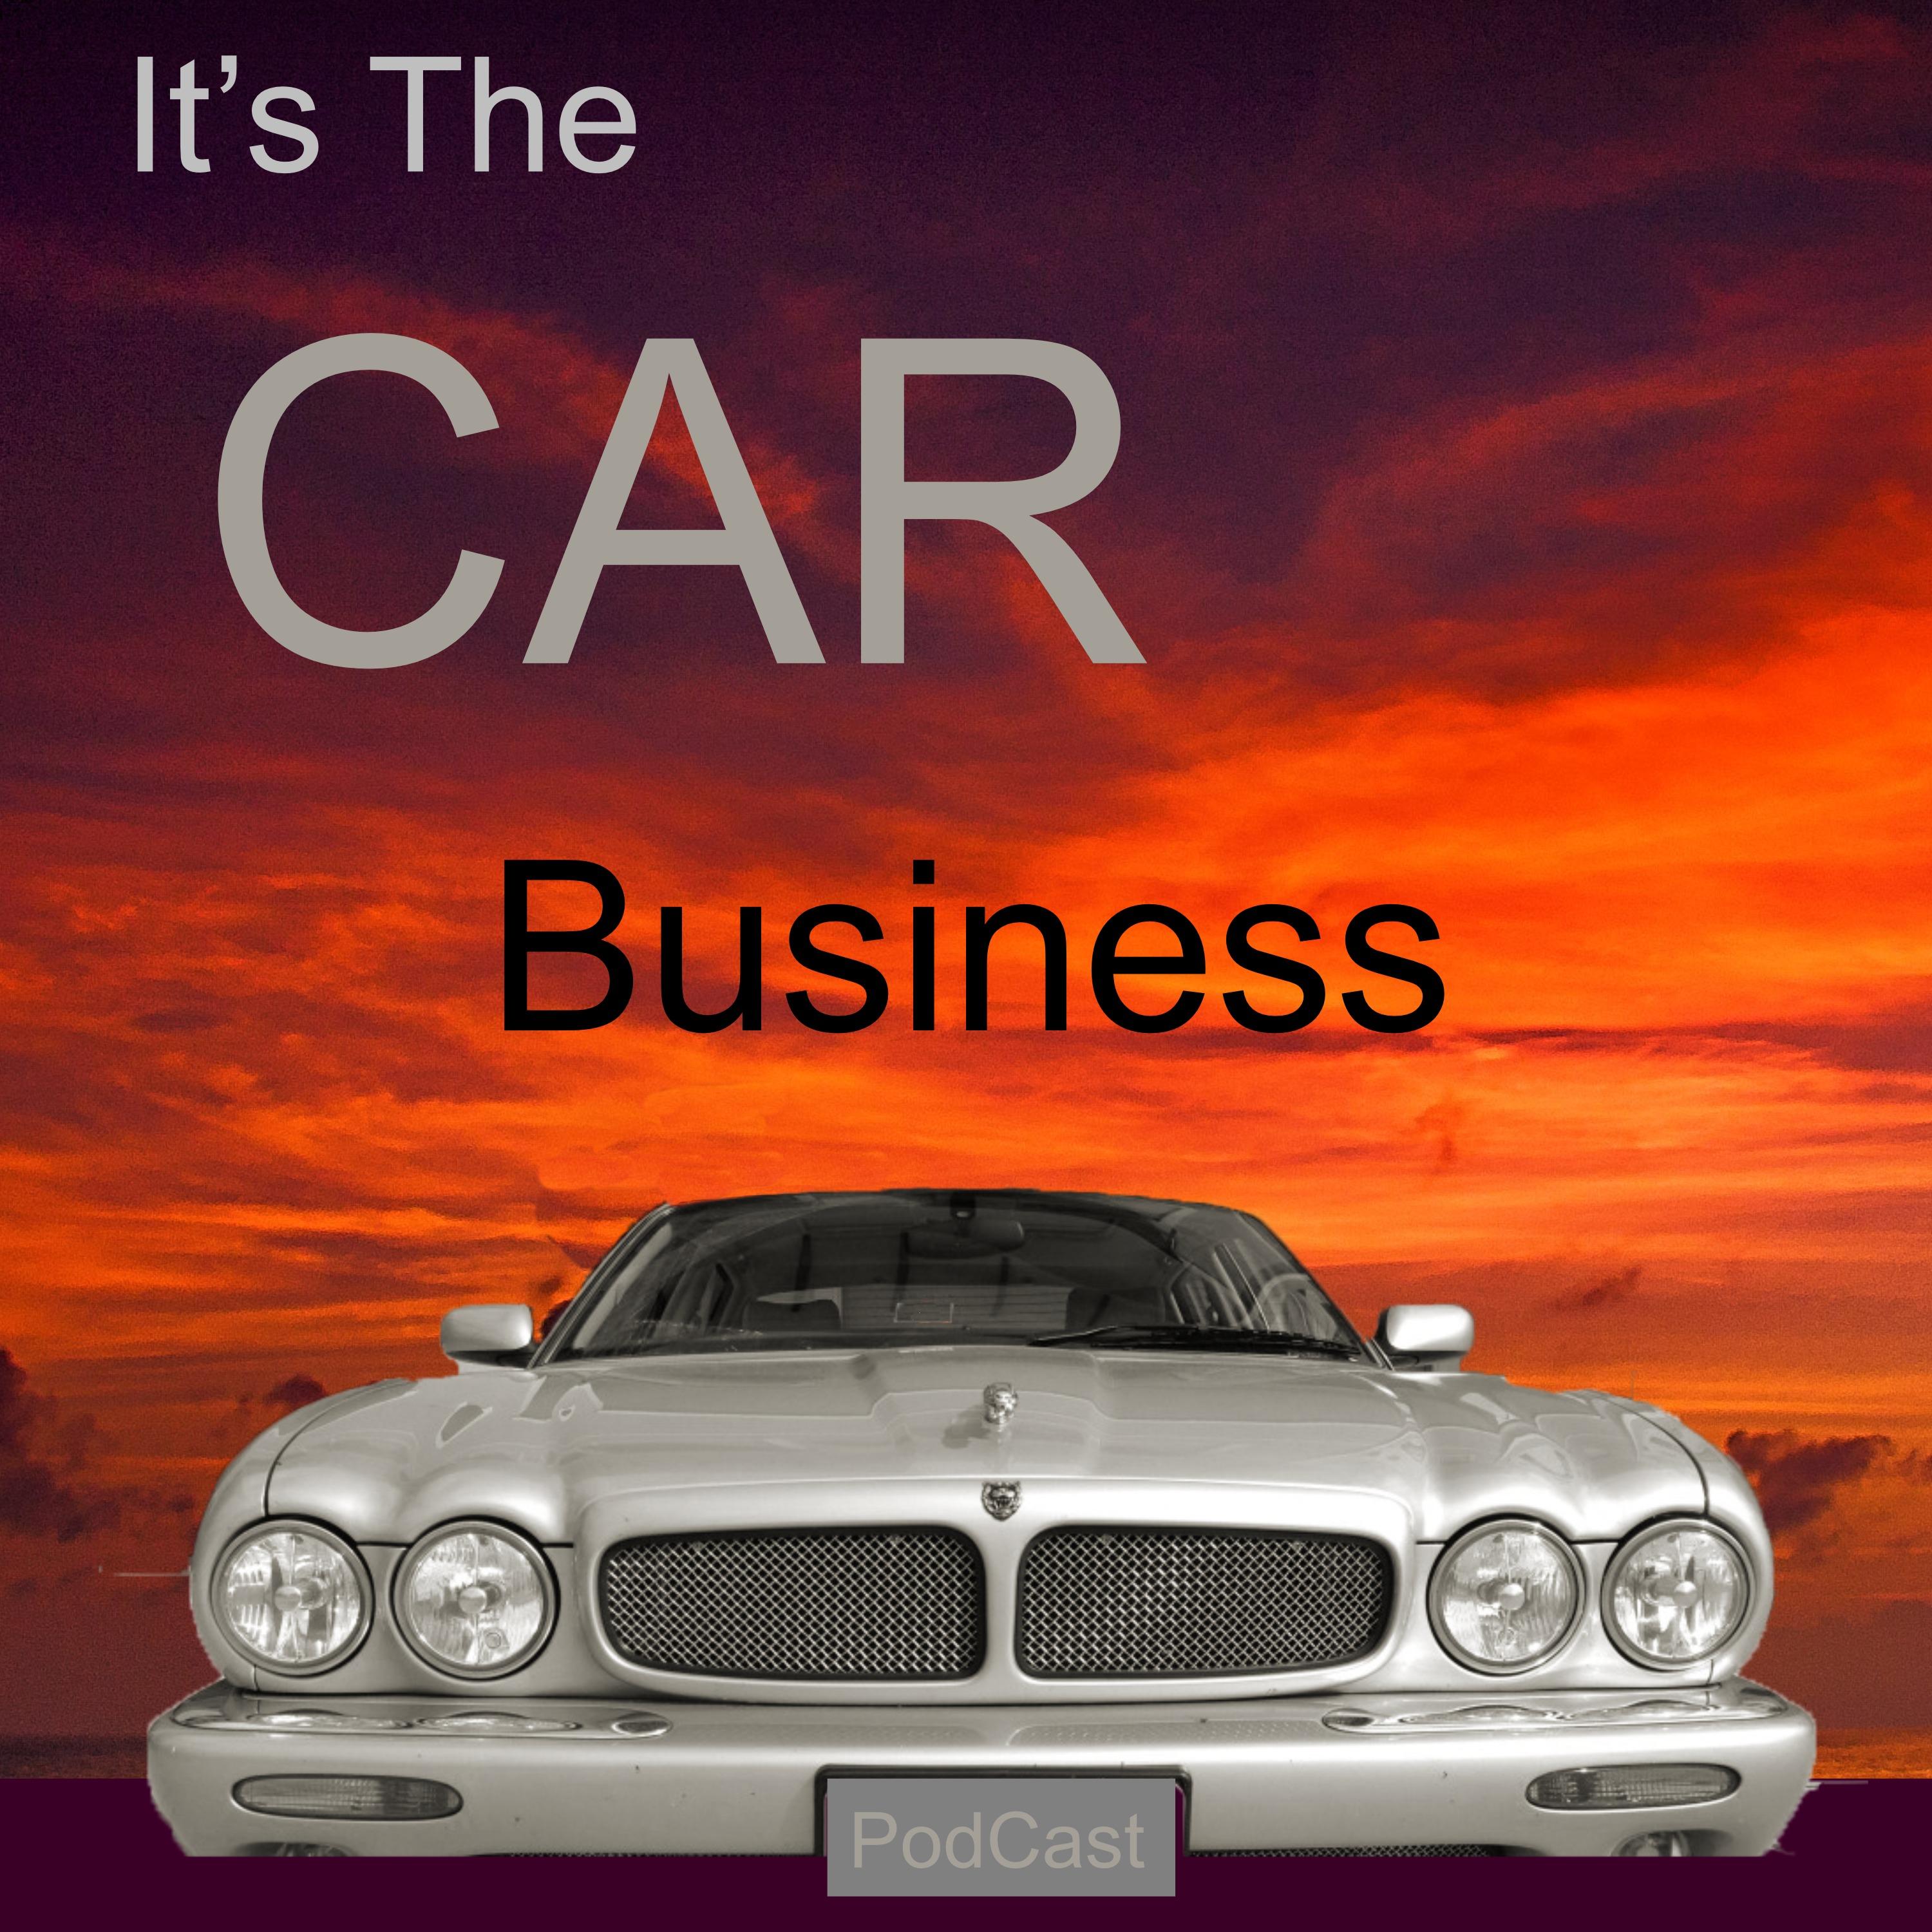 "It's The Car Business"